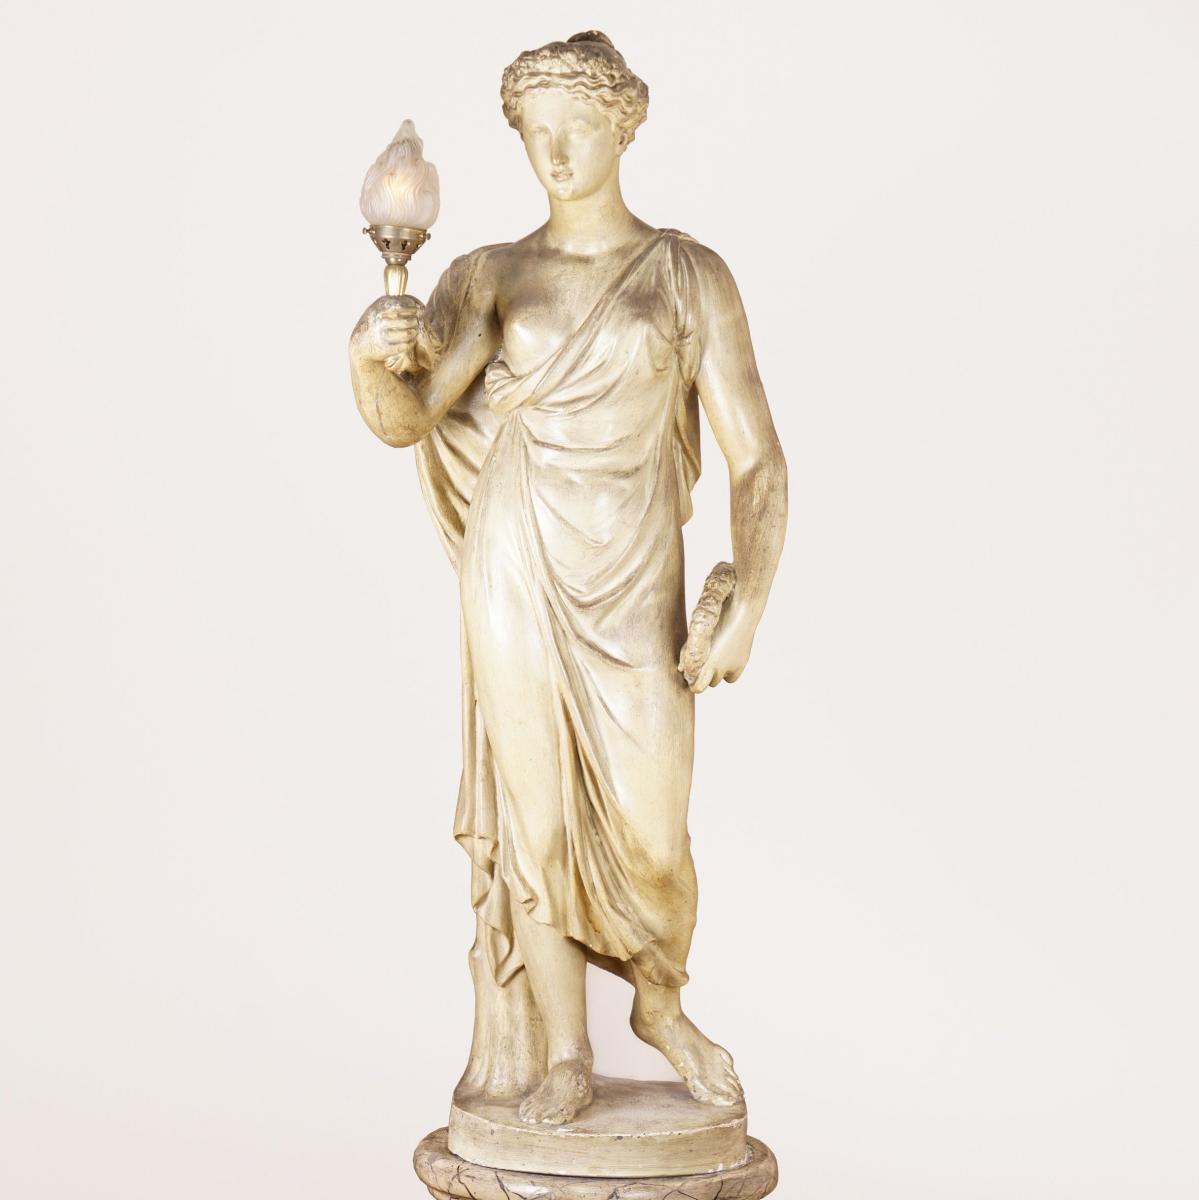 FIGURE OF FLORA HOLDING A LAMP